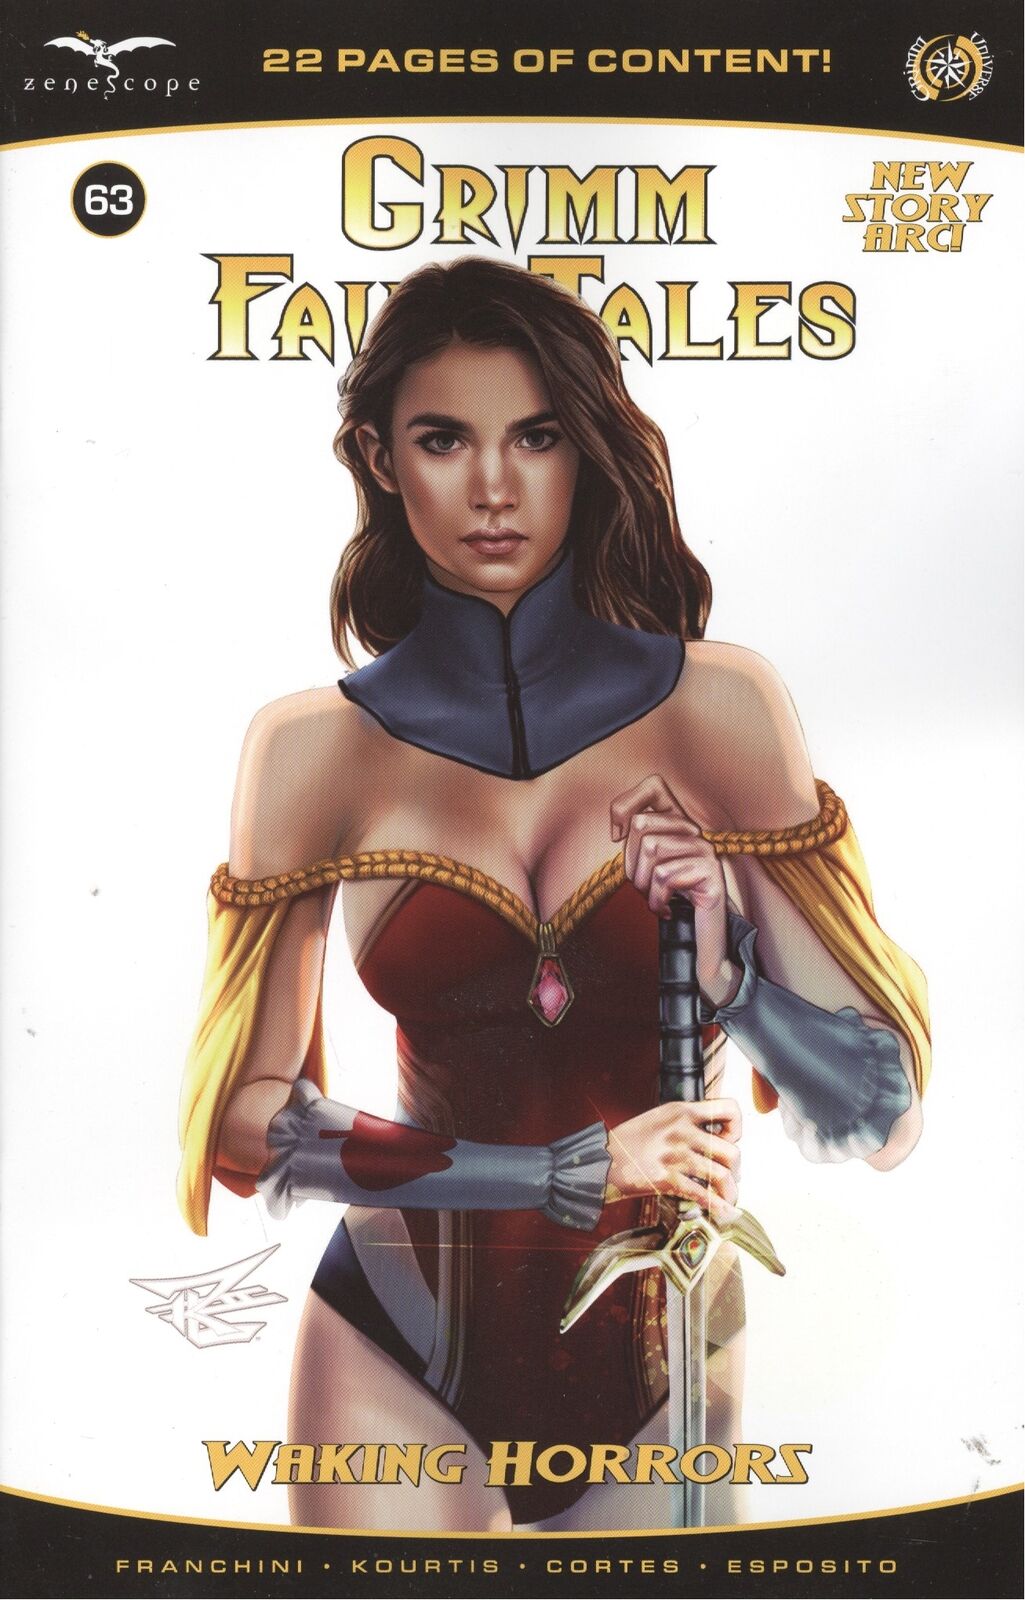 Grimm Fairy Tales #63 - Ron Leary Jr